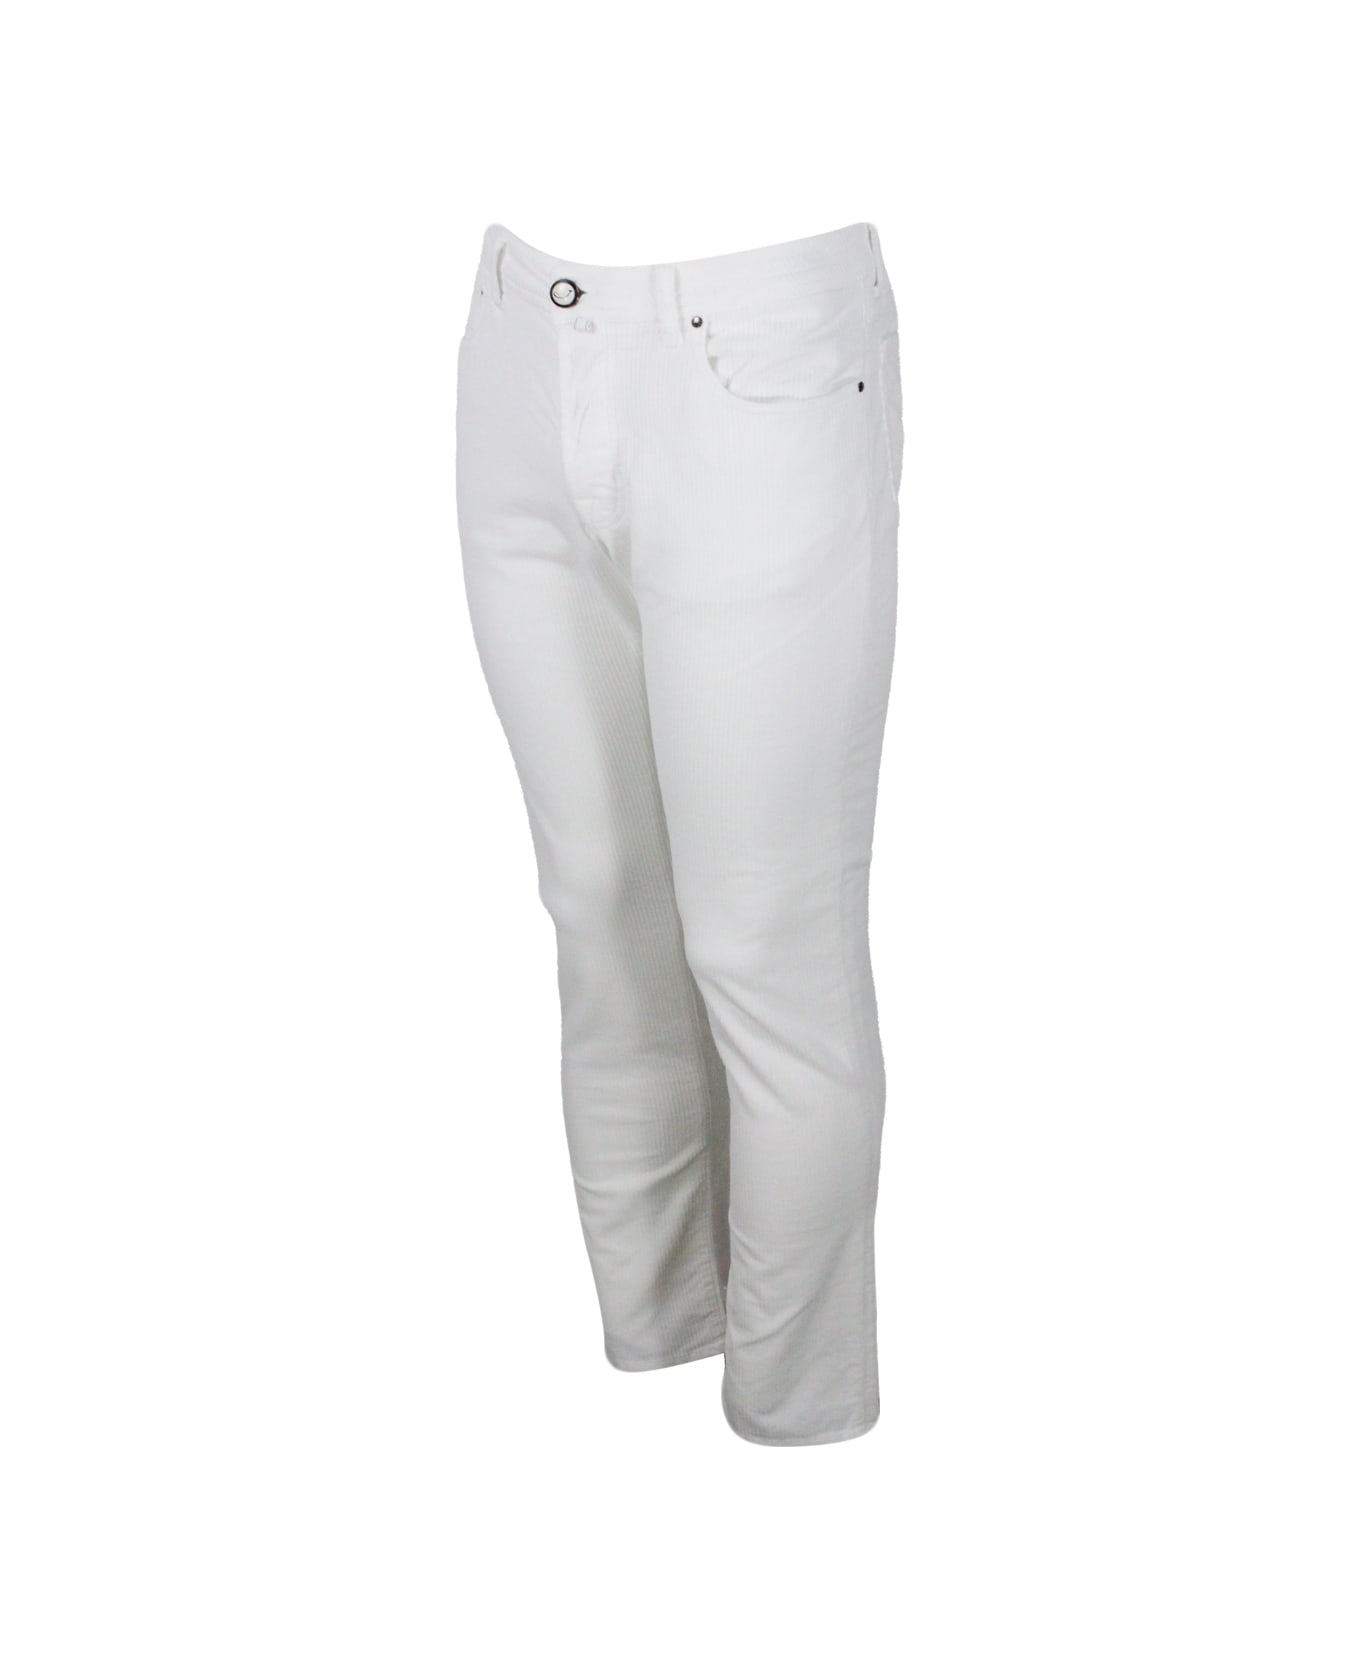 Jacob Cohen Bard J688 Trousers In Luxury Edition In Soft Rock Corduroy With 5 Pockets With Closure Buttons And Special Lacquered Button - White